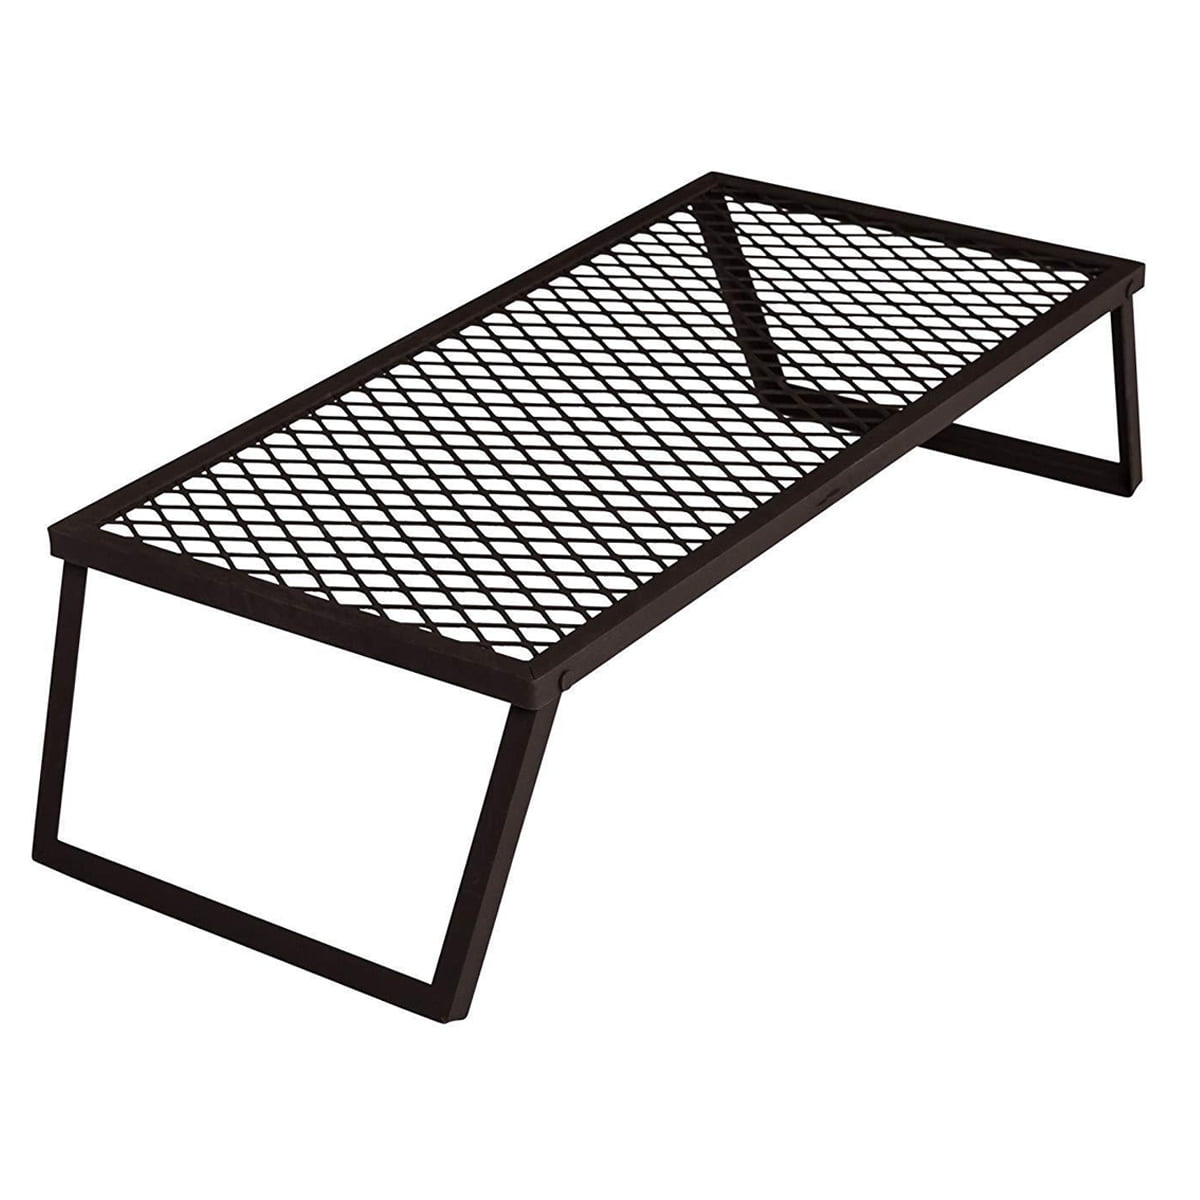 Folding Campfire Grill Fire Pit Cooking, Fire Pit Grill Plate